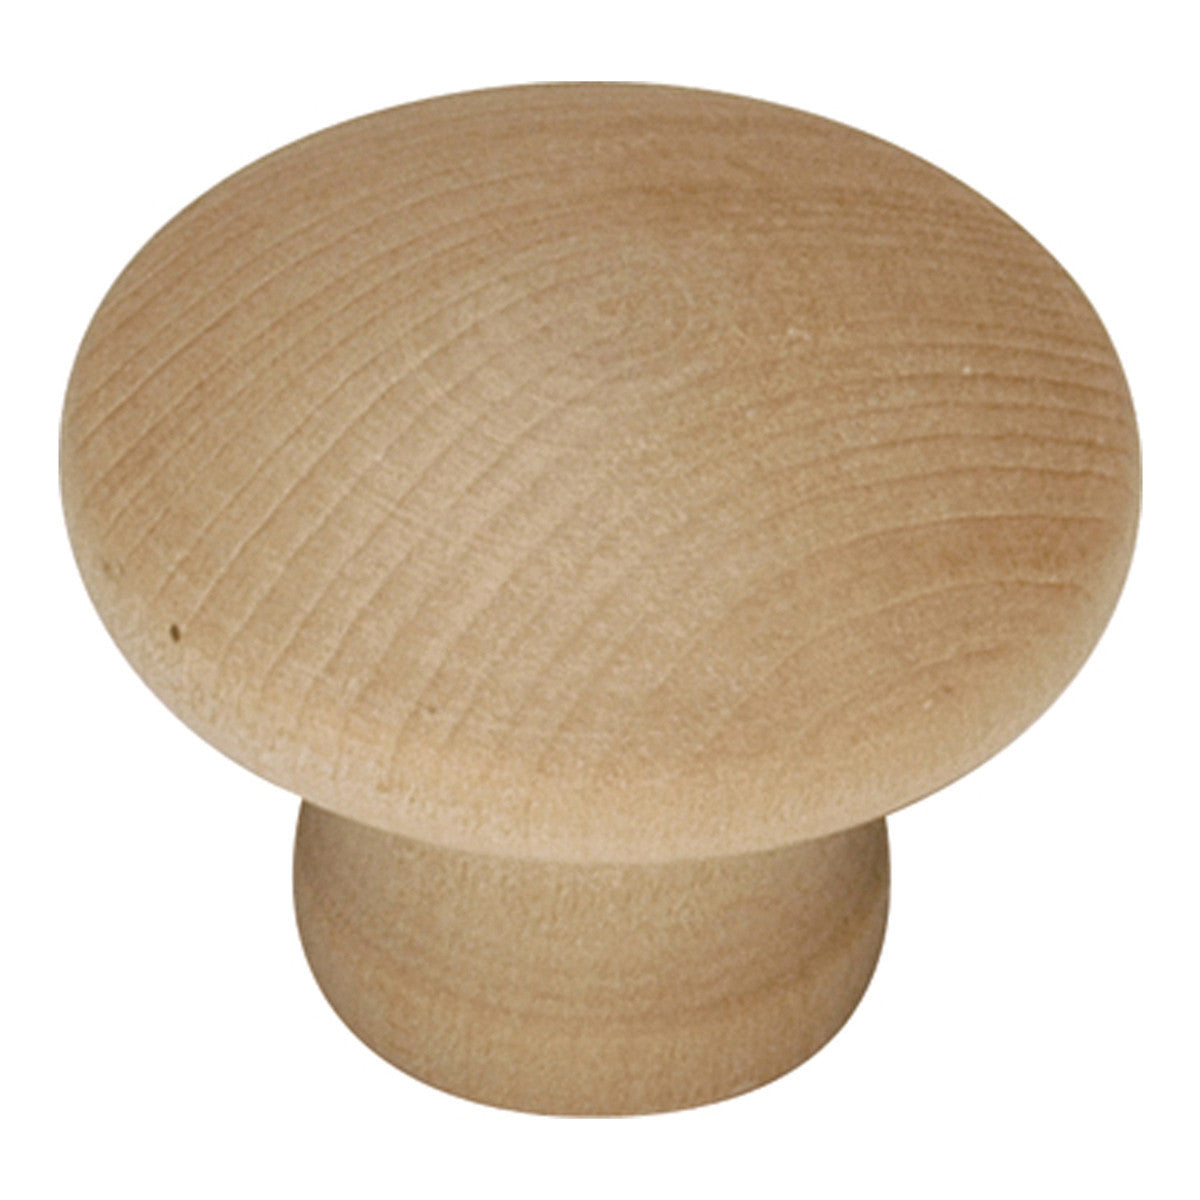 1 1 4 In Natural Woodcraft Unfinished Wood Cabinet Knob Hickory